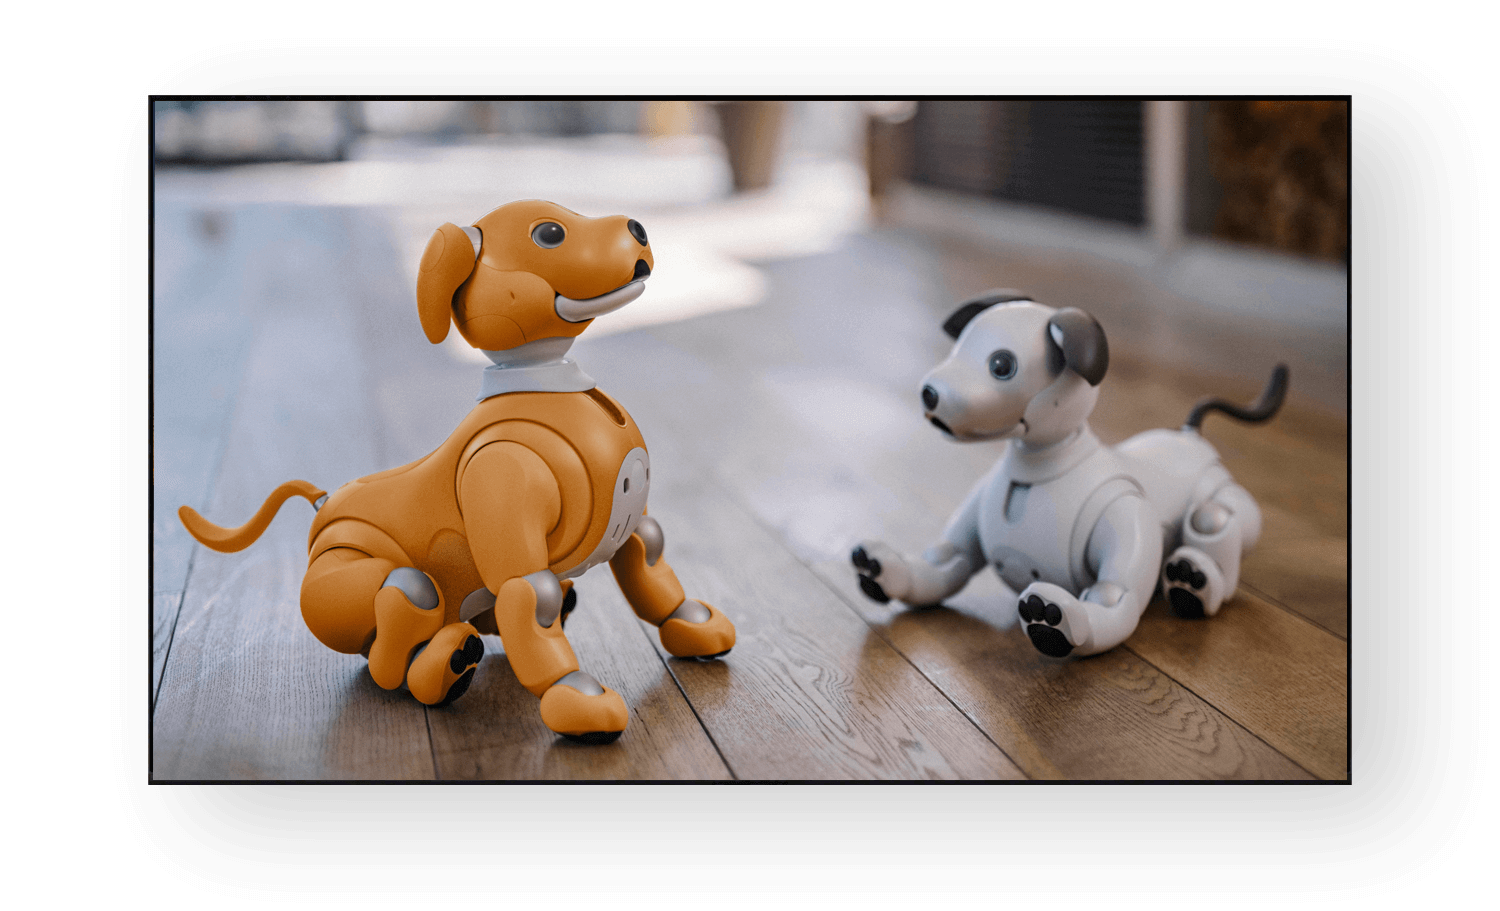 aiboFMy story with aibo